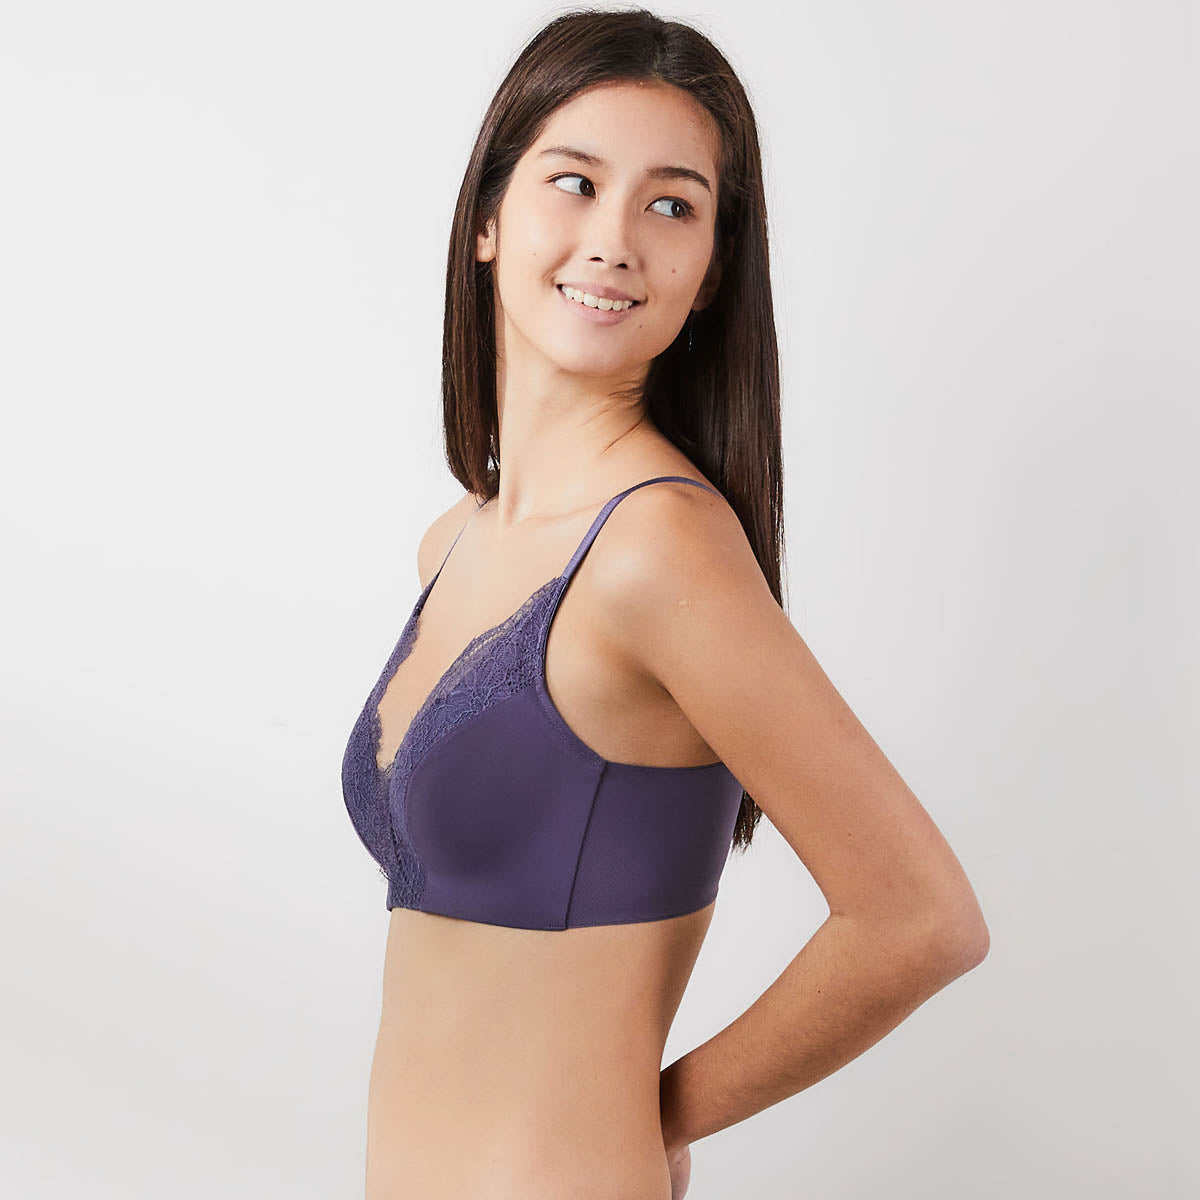 Solution Max Free W-shape Support Non Wired Lace Bra Bra Her Own Words 